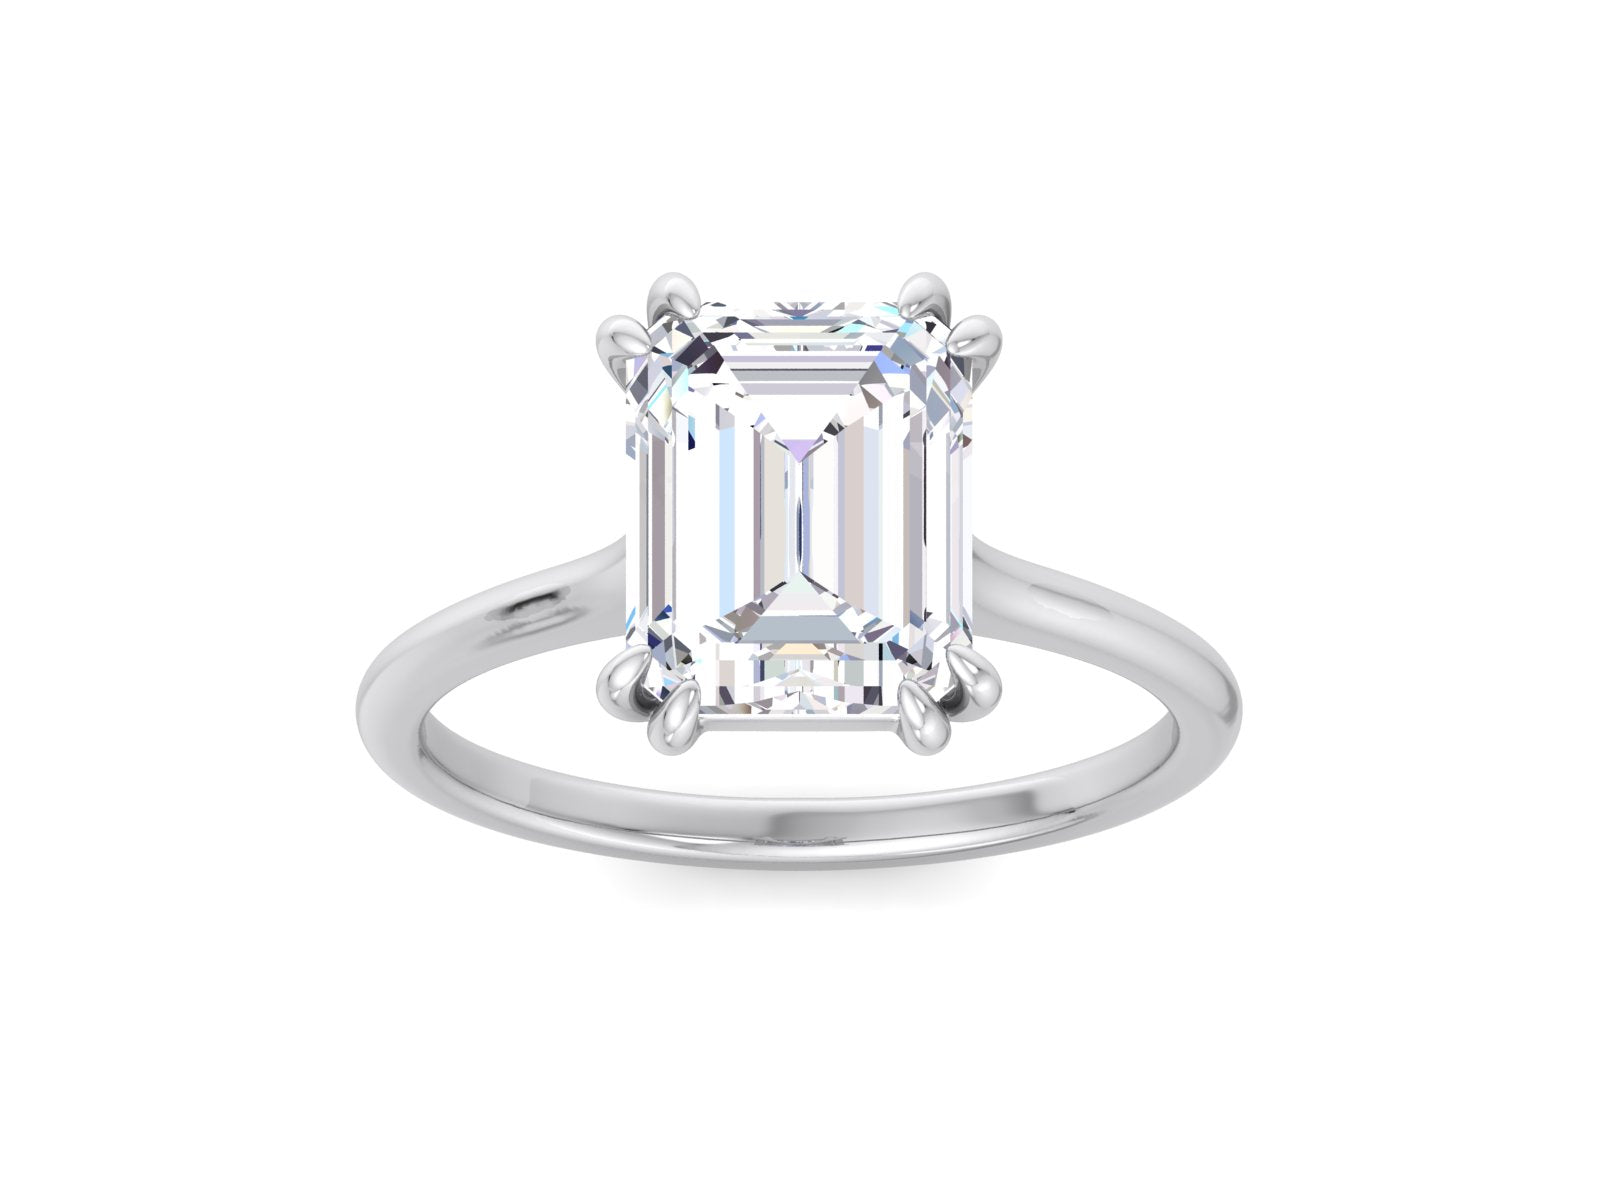 3.8CT Emerald Cut Moissanite Ring, 14K Solid Yellow Gold Solitaire Engagement Ring